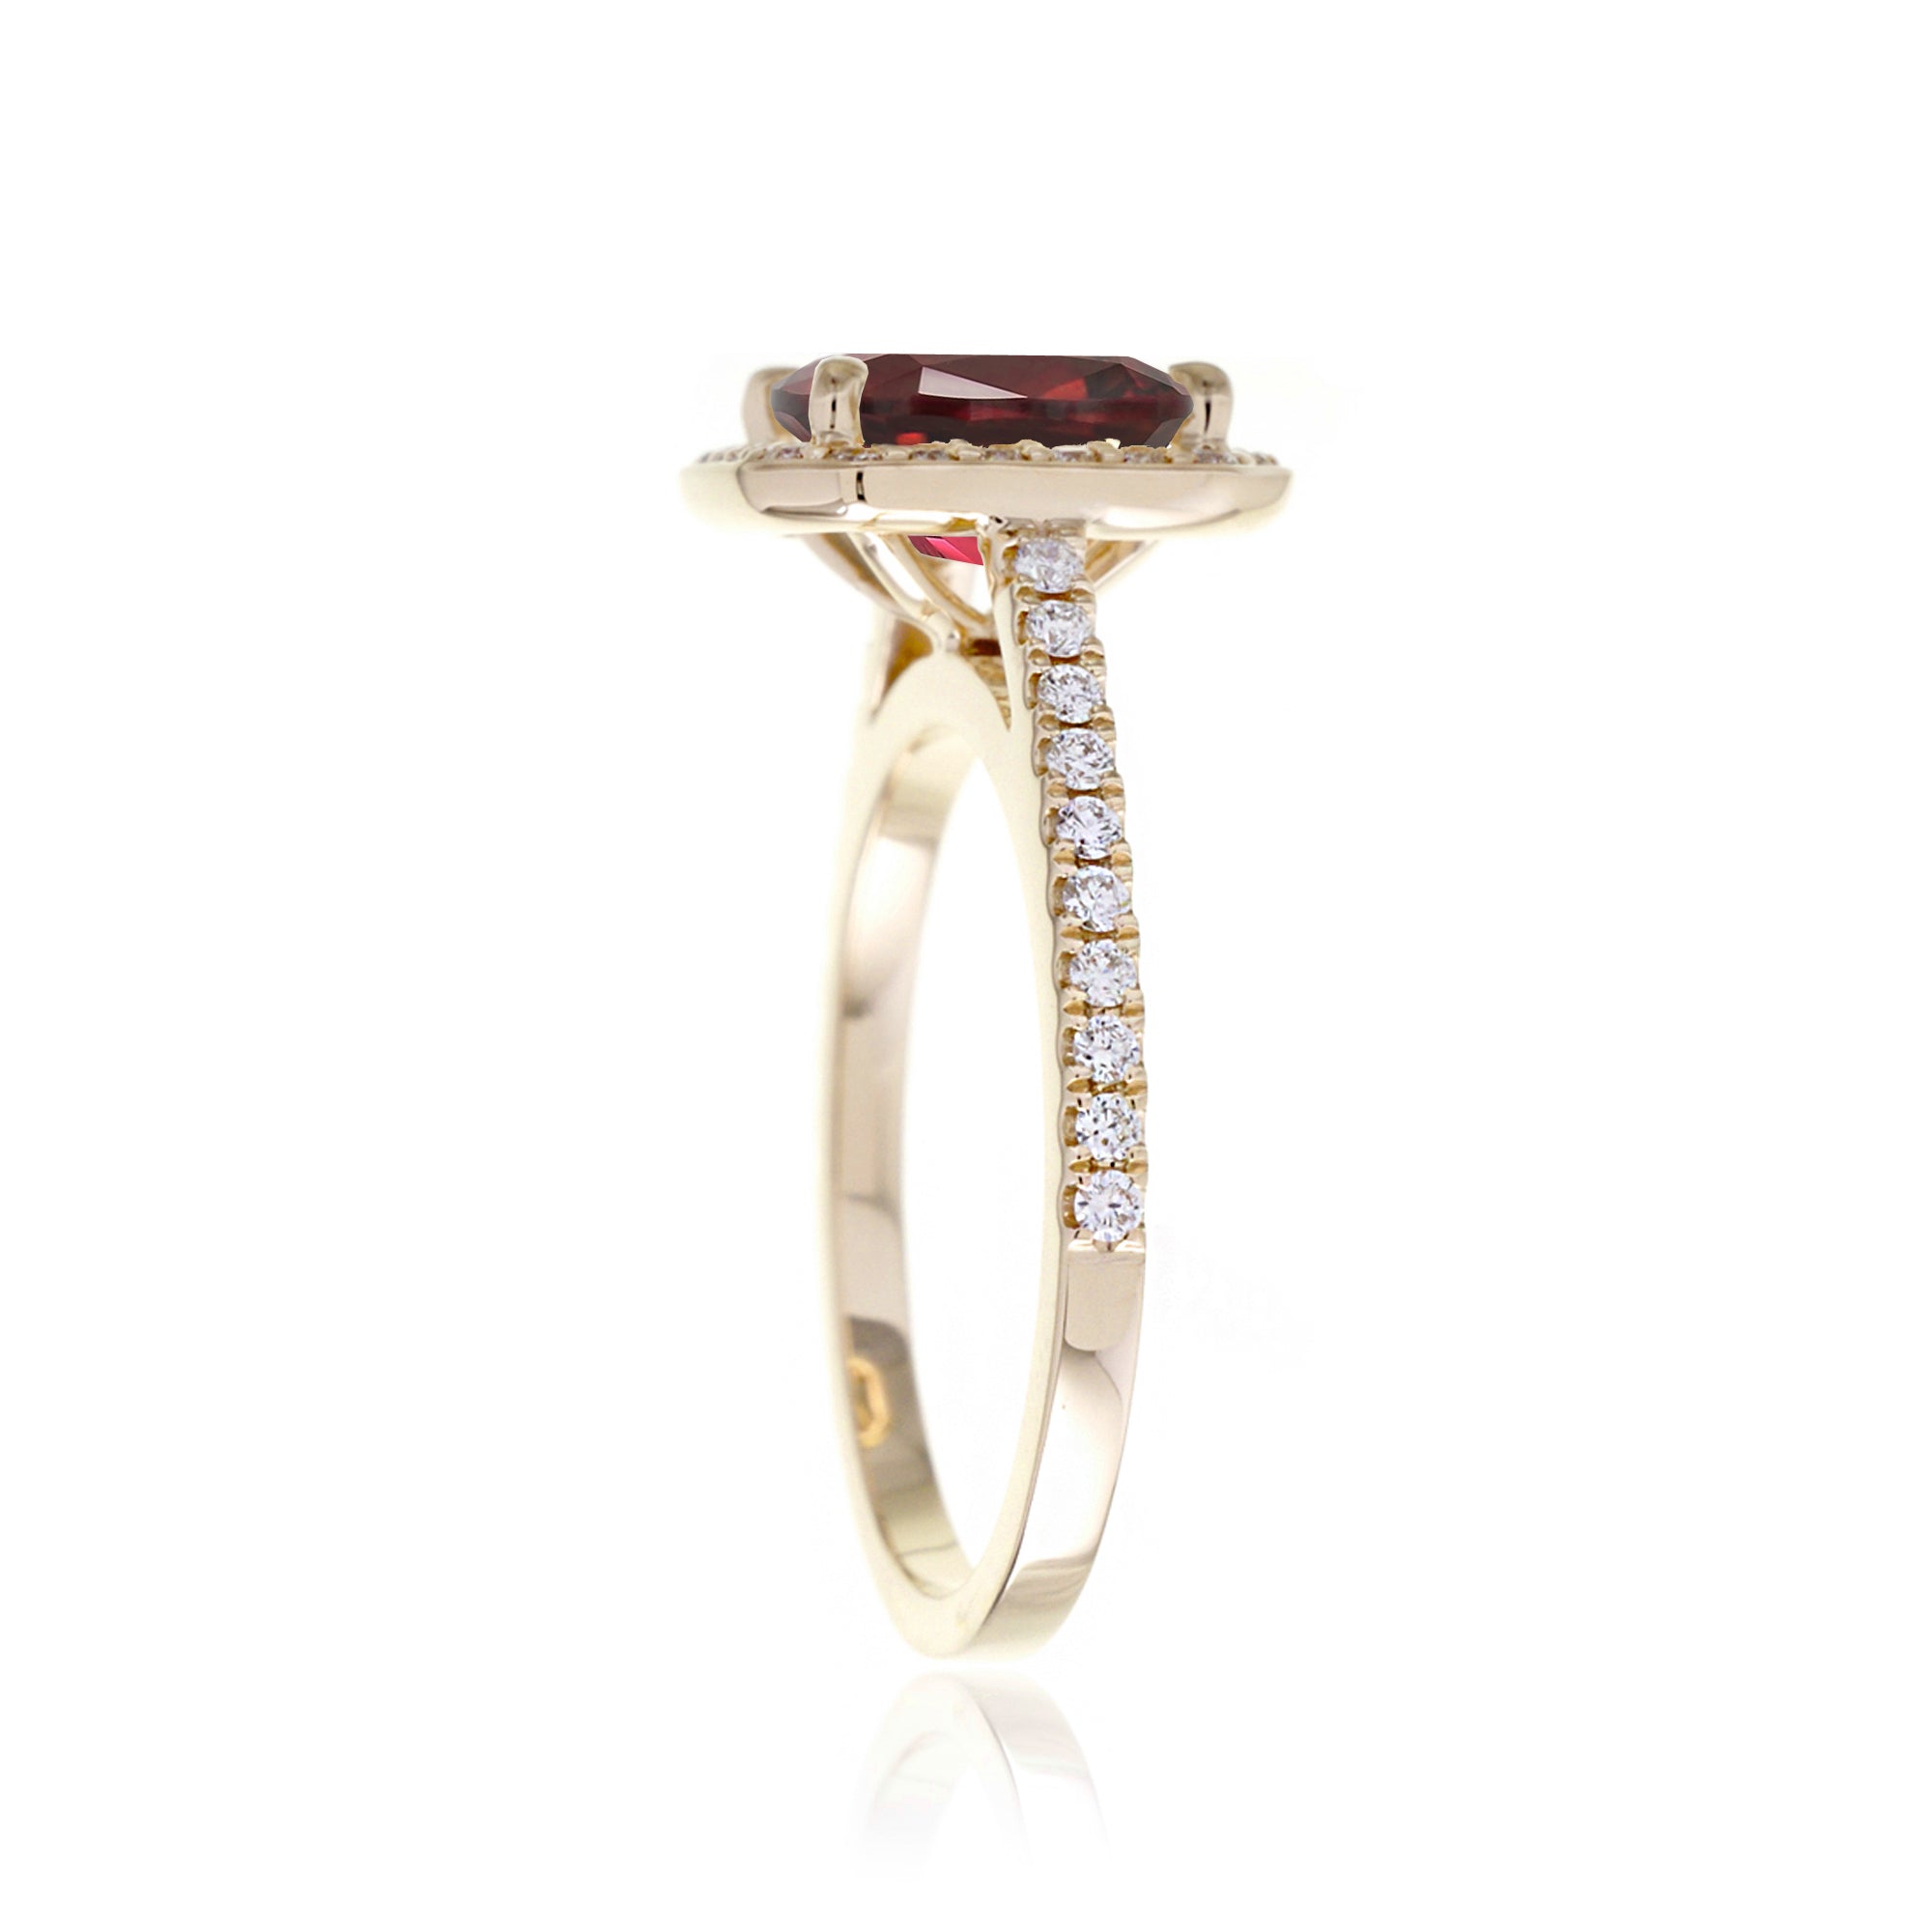 Cushion lab-grown ruby diamond halo cathedral engagement ring - the Steffy yellow gold